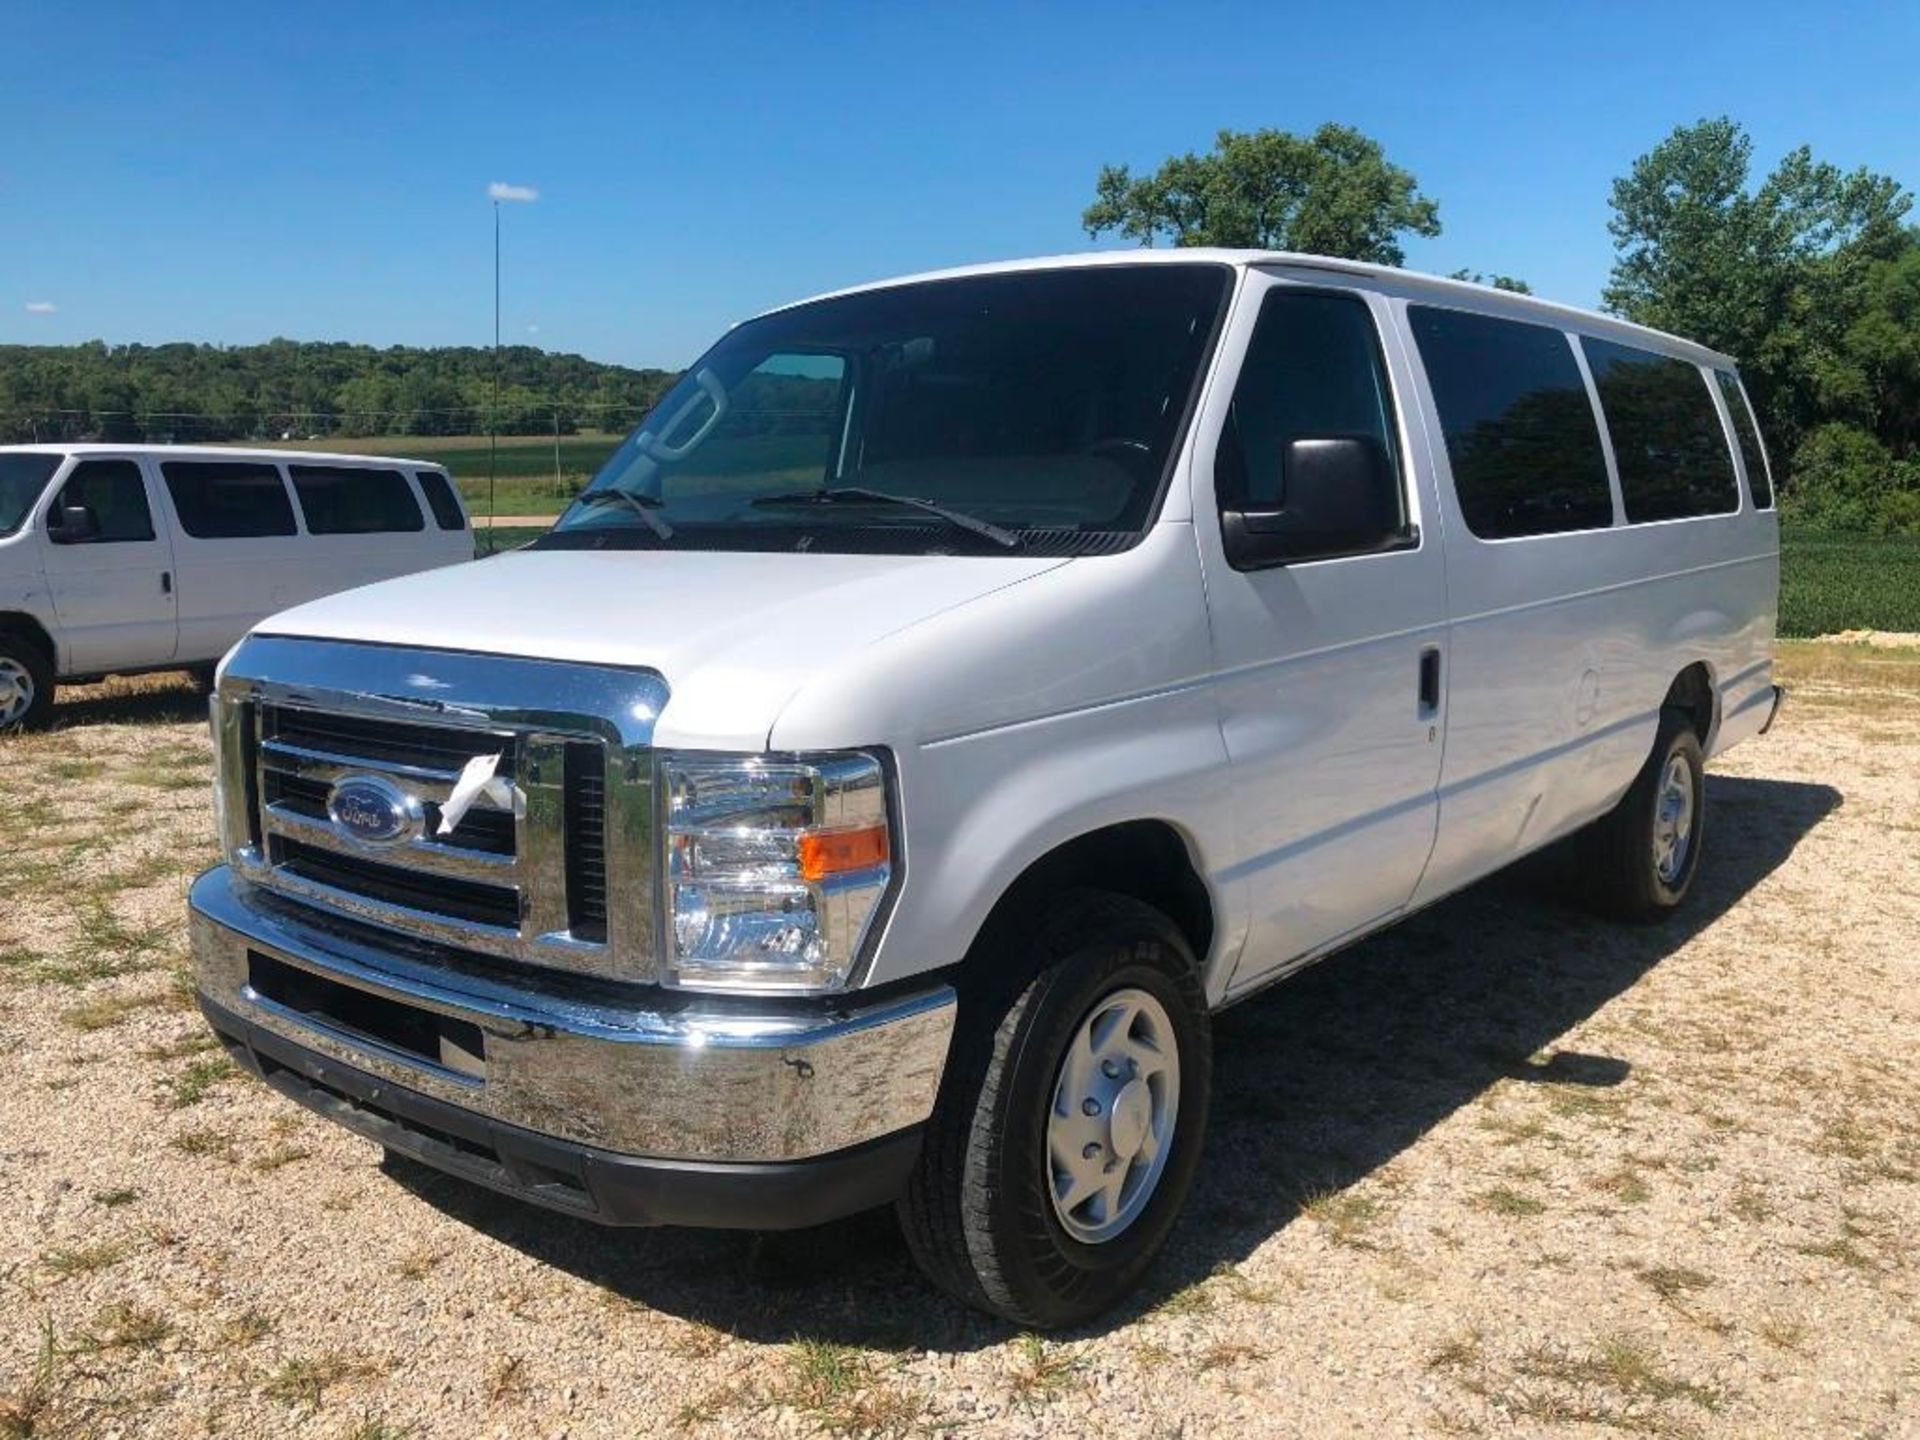 2013 Ford E3500 XLT Super Duty Van, VIN #1FBSS3BL3DDB08028, 183916 Miles, Catalytic Converter has - Image 2 of 19